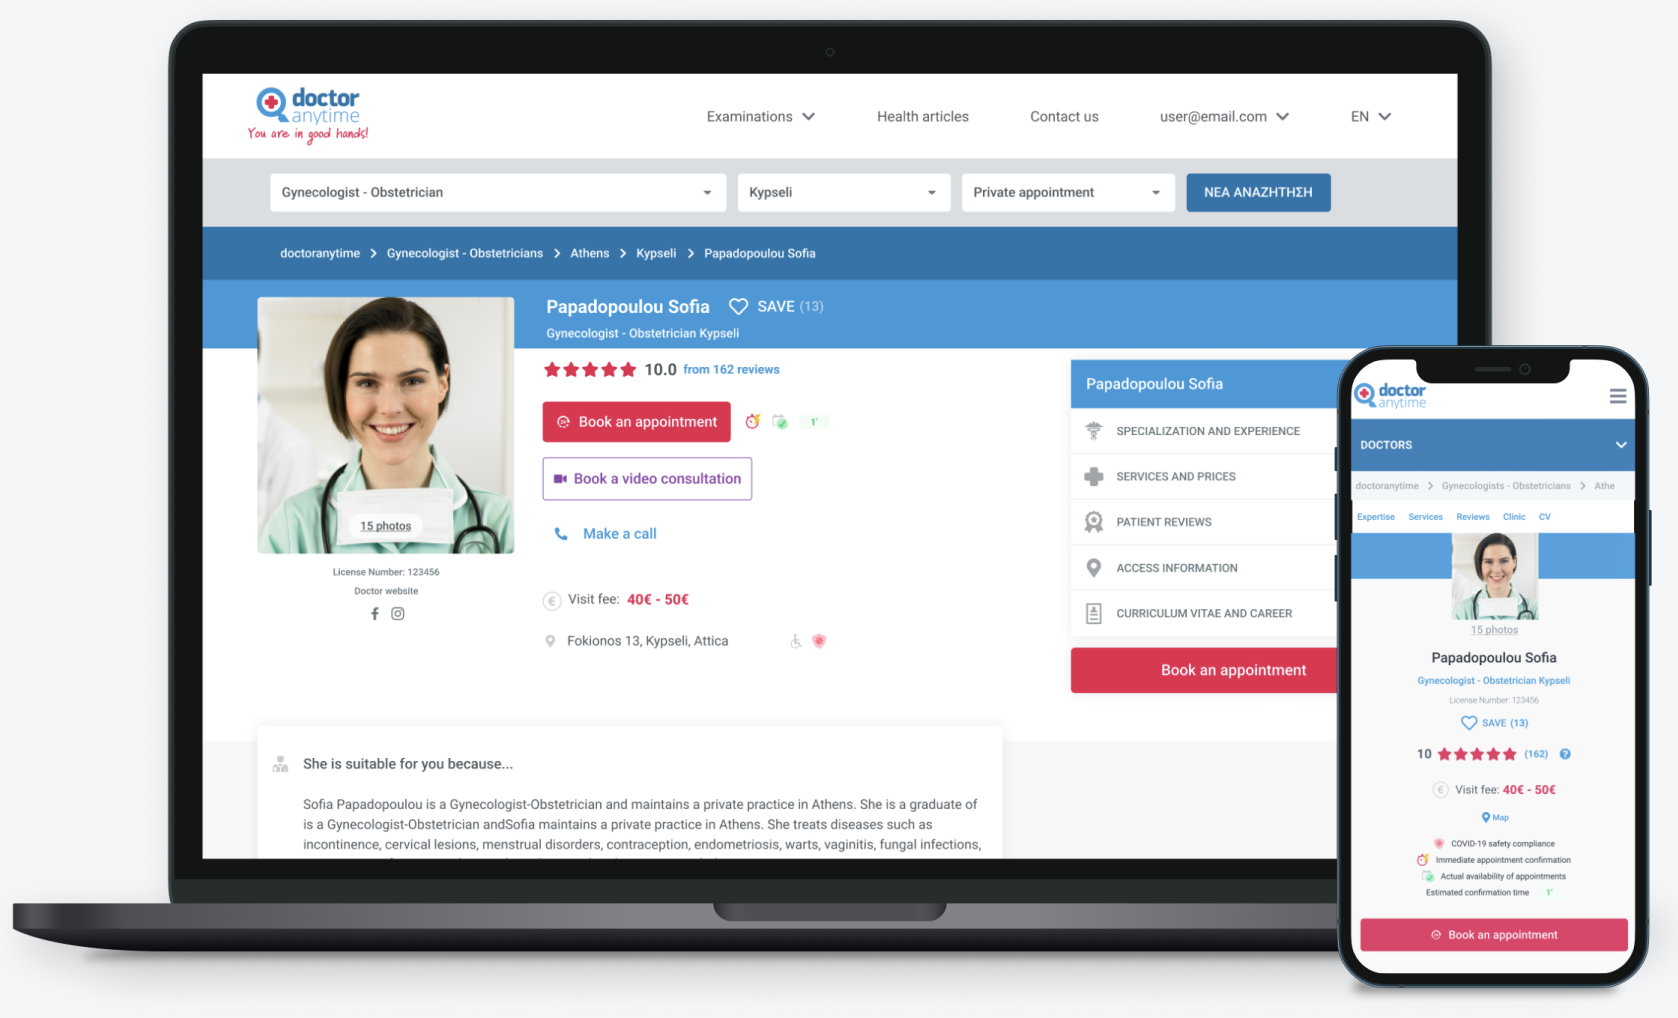 doctoranytime Software - The custom medical profile helps doctors build their professional reputation online and increase their visibility.